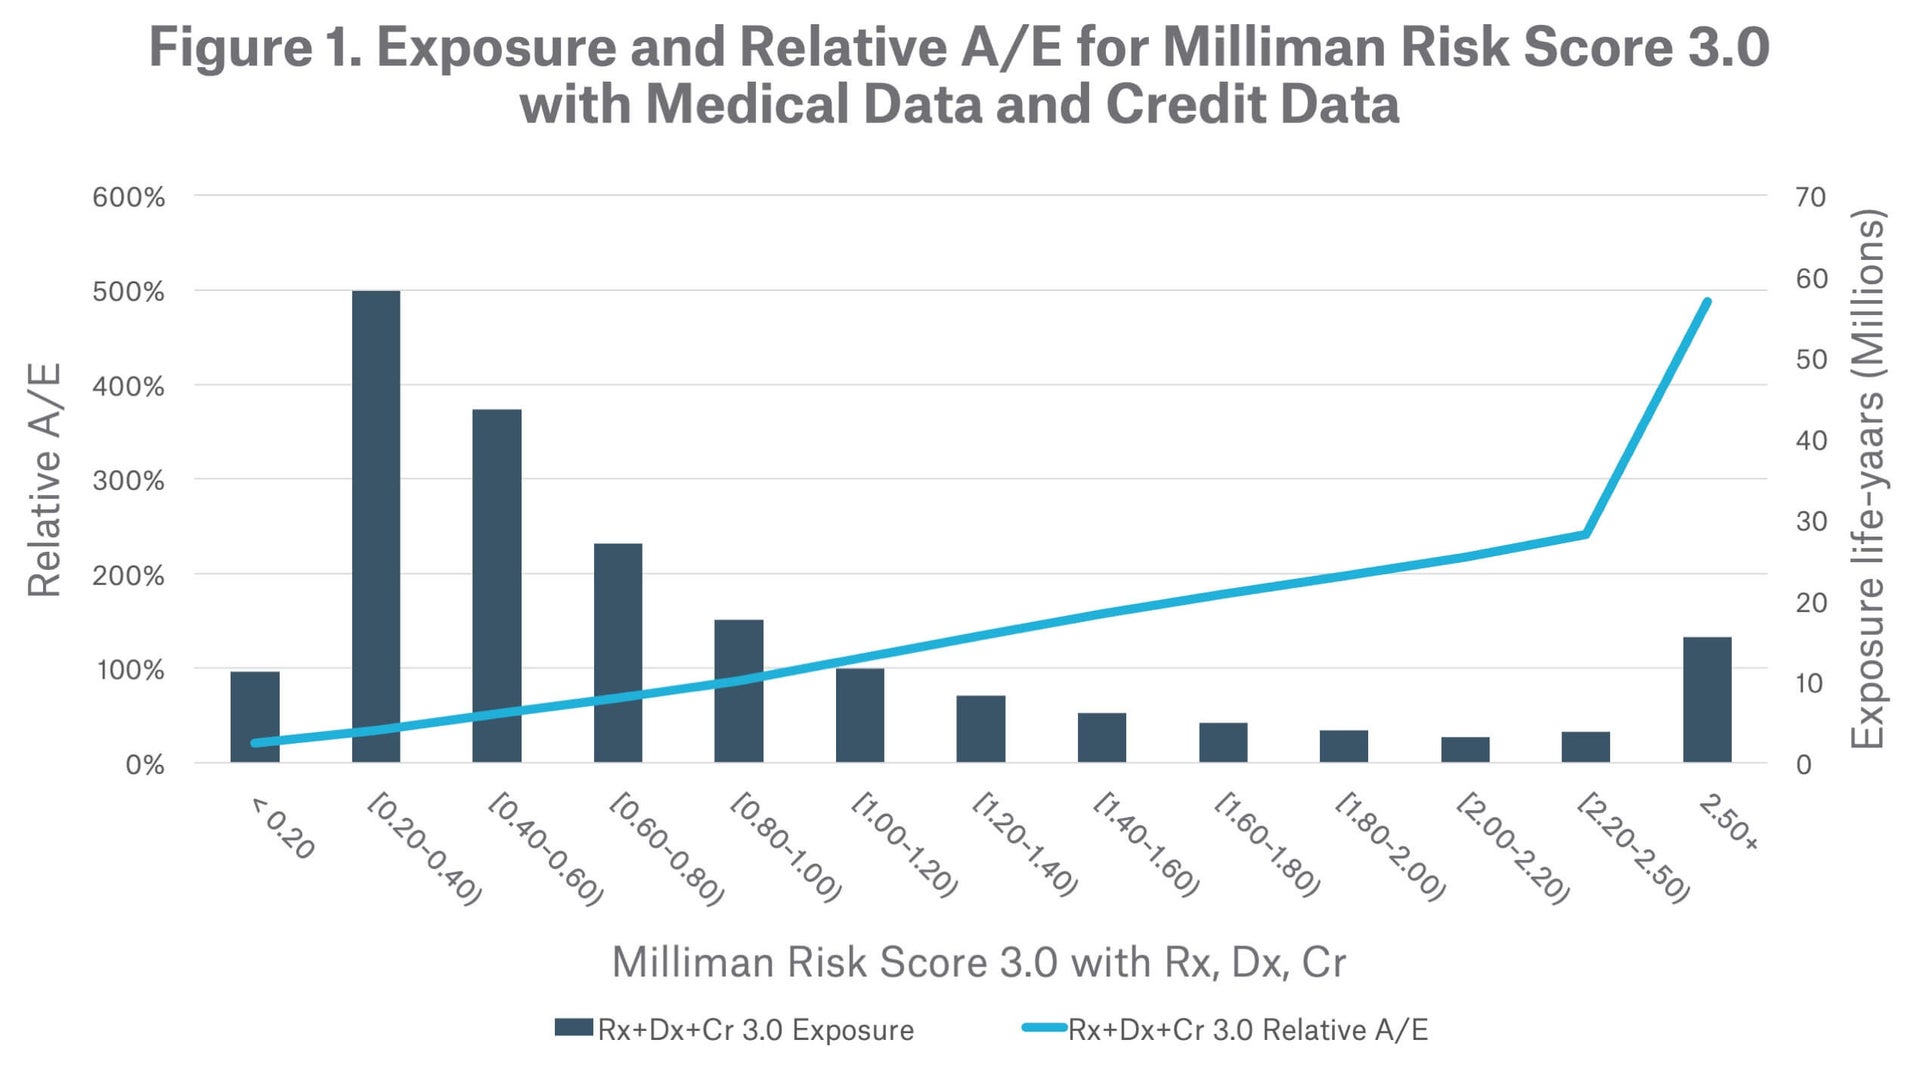 Figure-1.Exposure-and-Relative-A-E for-Milliman-Risk-Score-3.0-with-Medical-and-Credit Data.jpg